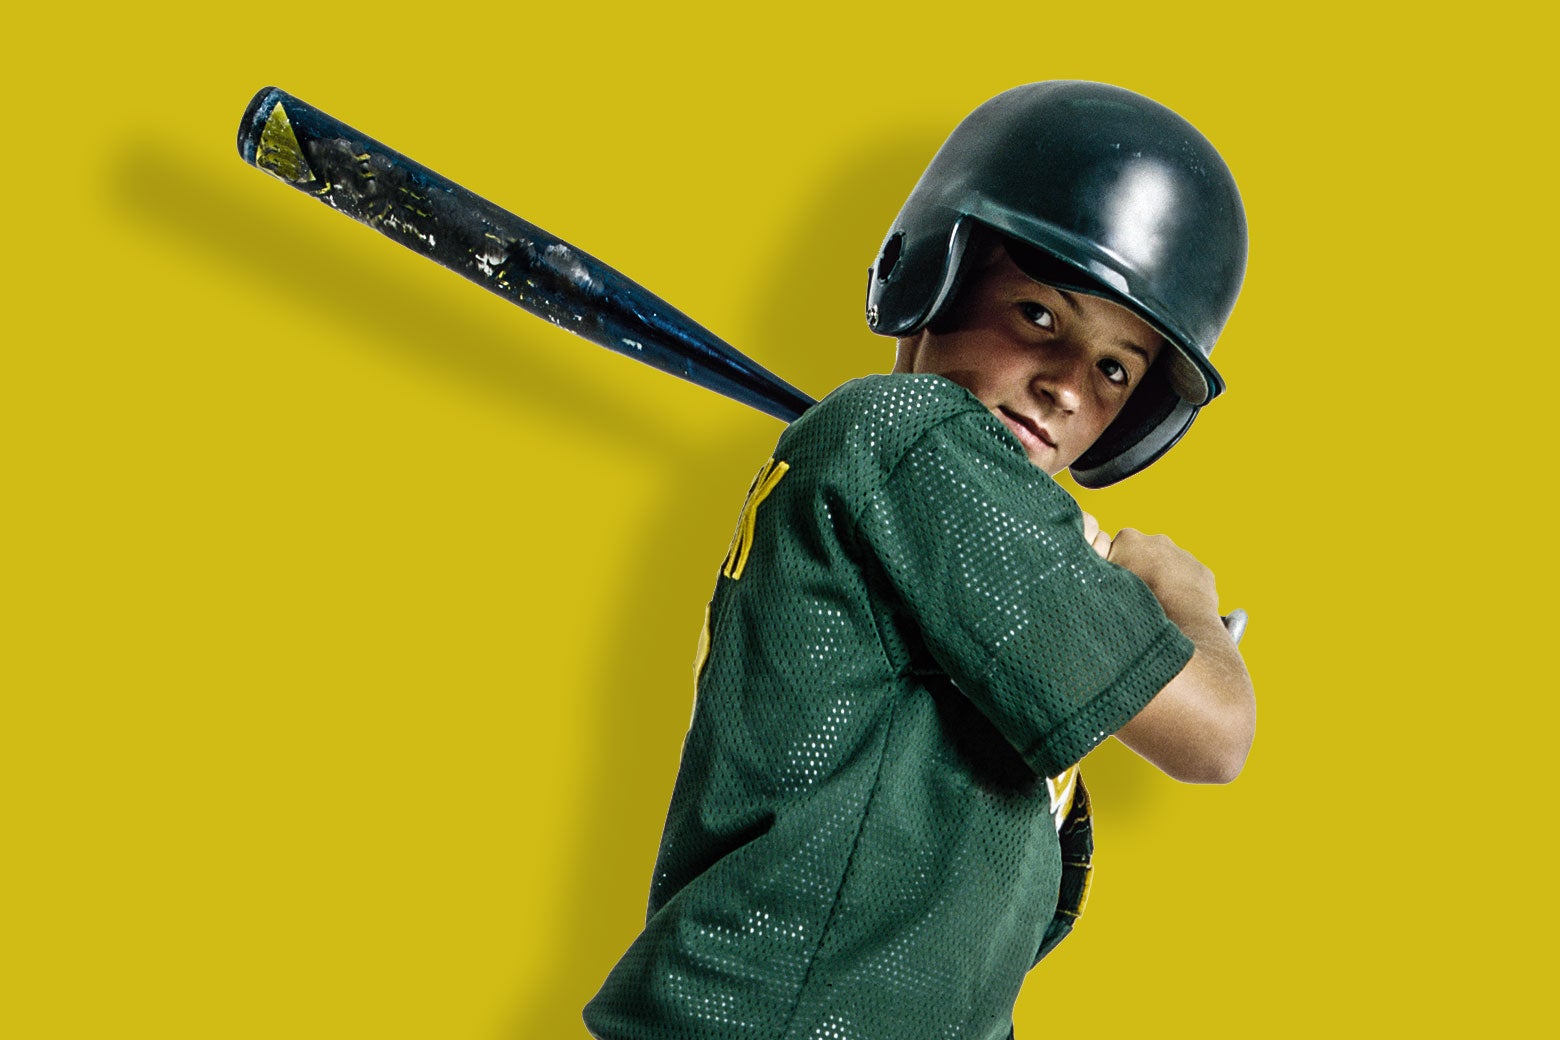 Why my son won't swing at a single youth-baseball pitch.